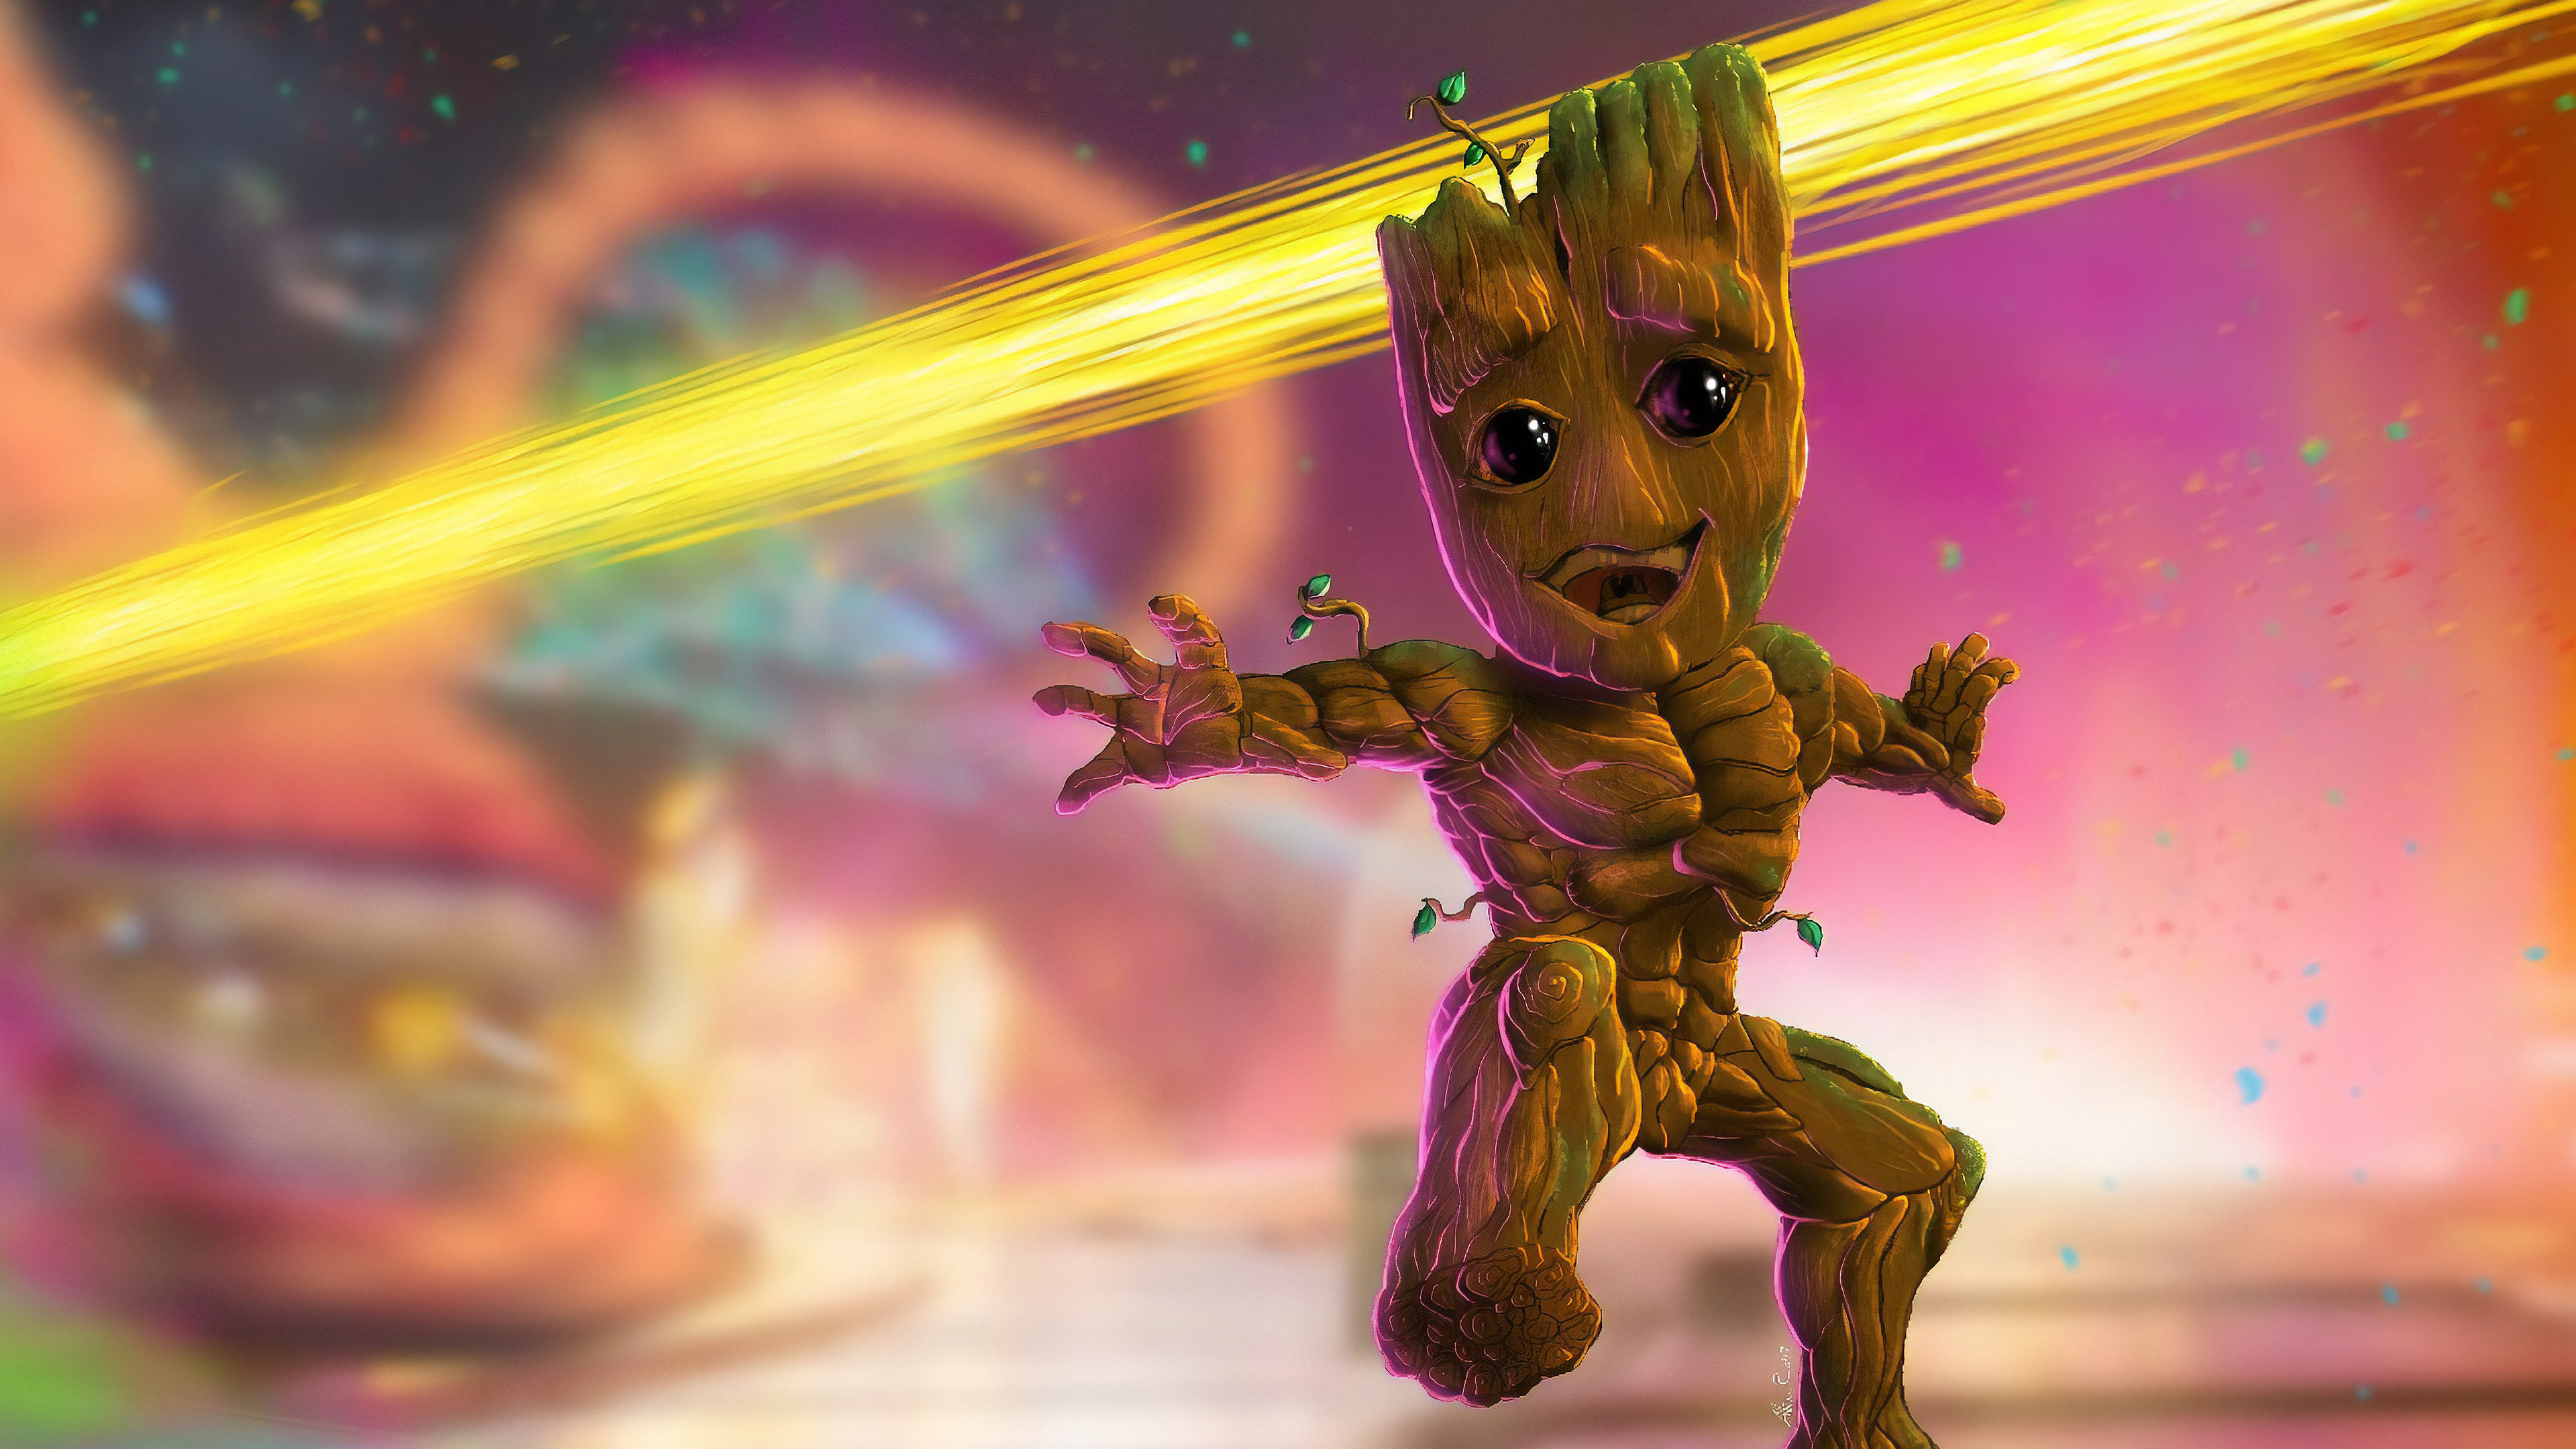 Baby Groot 4k 2019, HD Superheroes, 4k Wallpapers, Images, Backgrounds,  Photos and Pictures